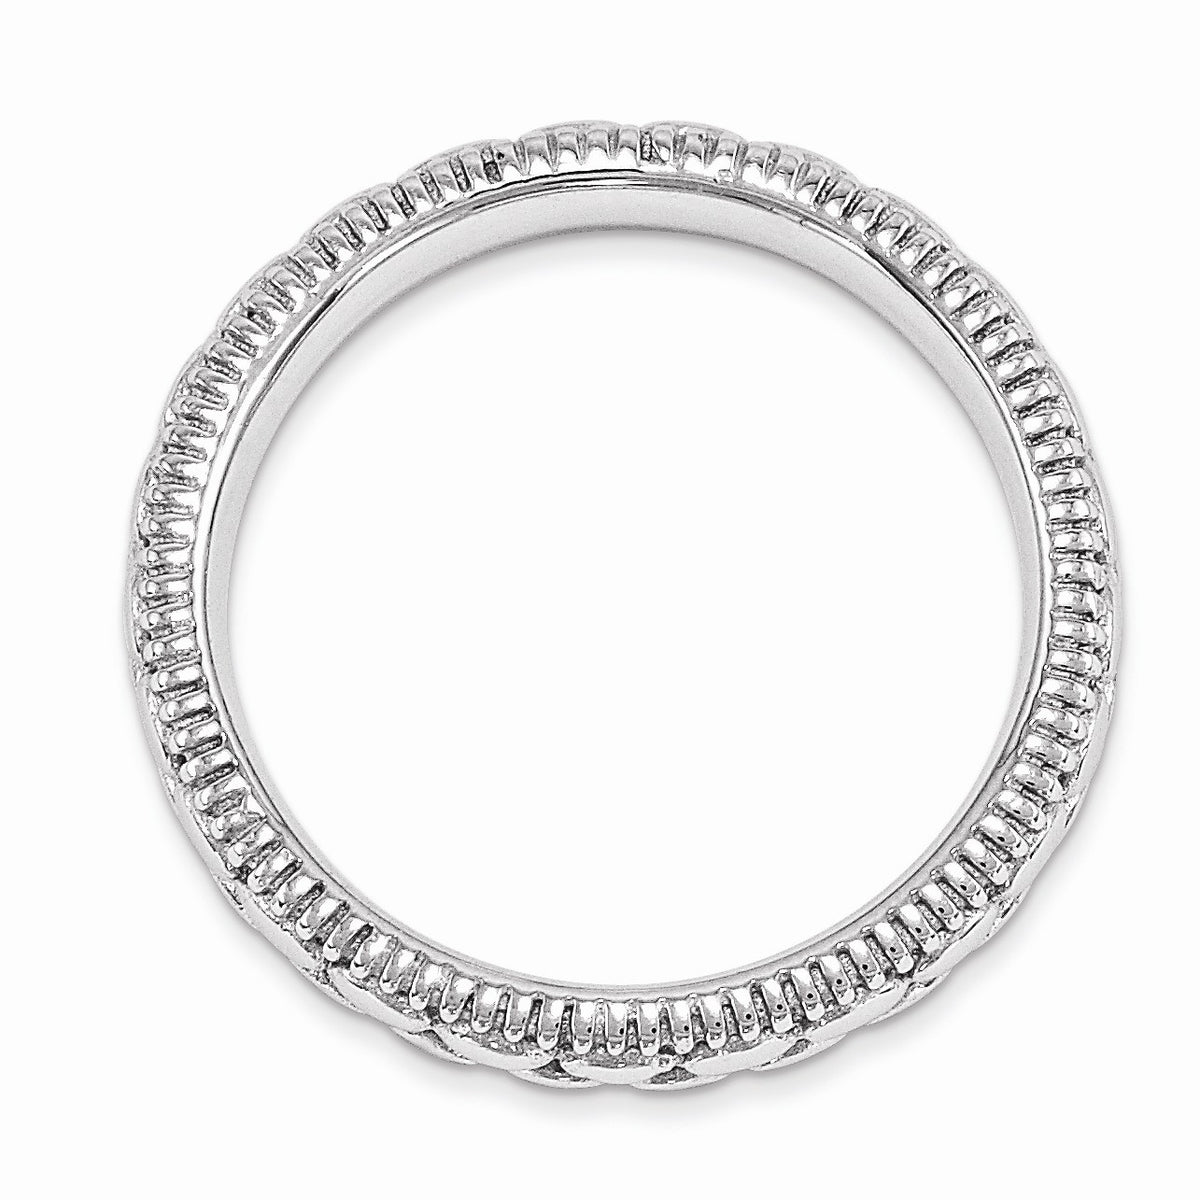 Alternate view of the 3.5mm Rhodium Plated Sterling Silver Stackable Patterned Band by The Black Bow Jewelry Co.